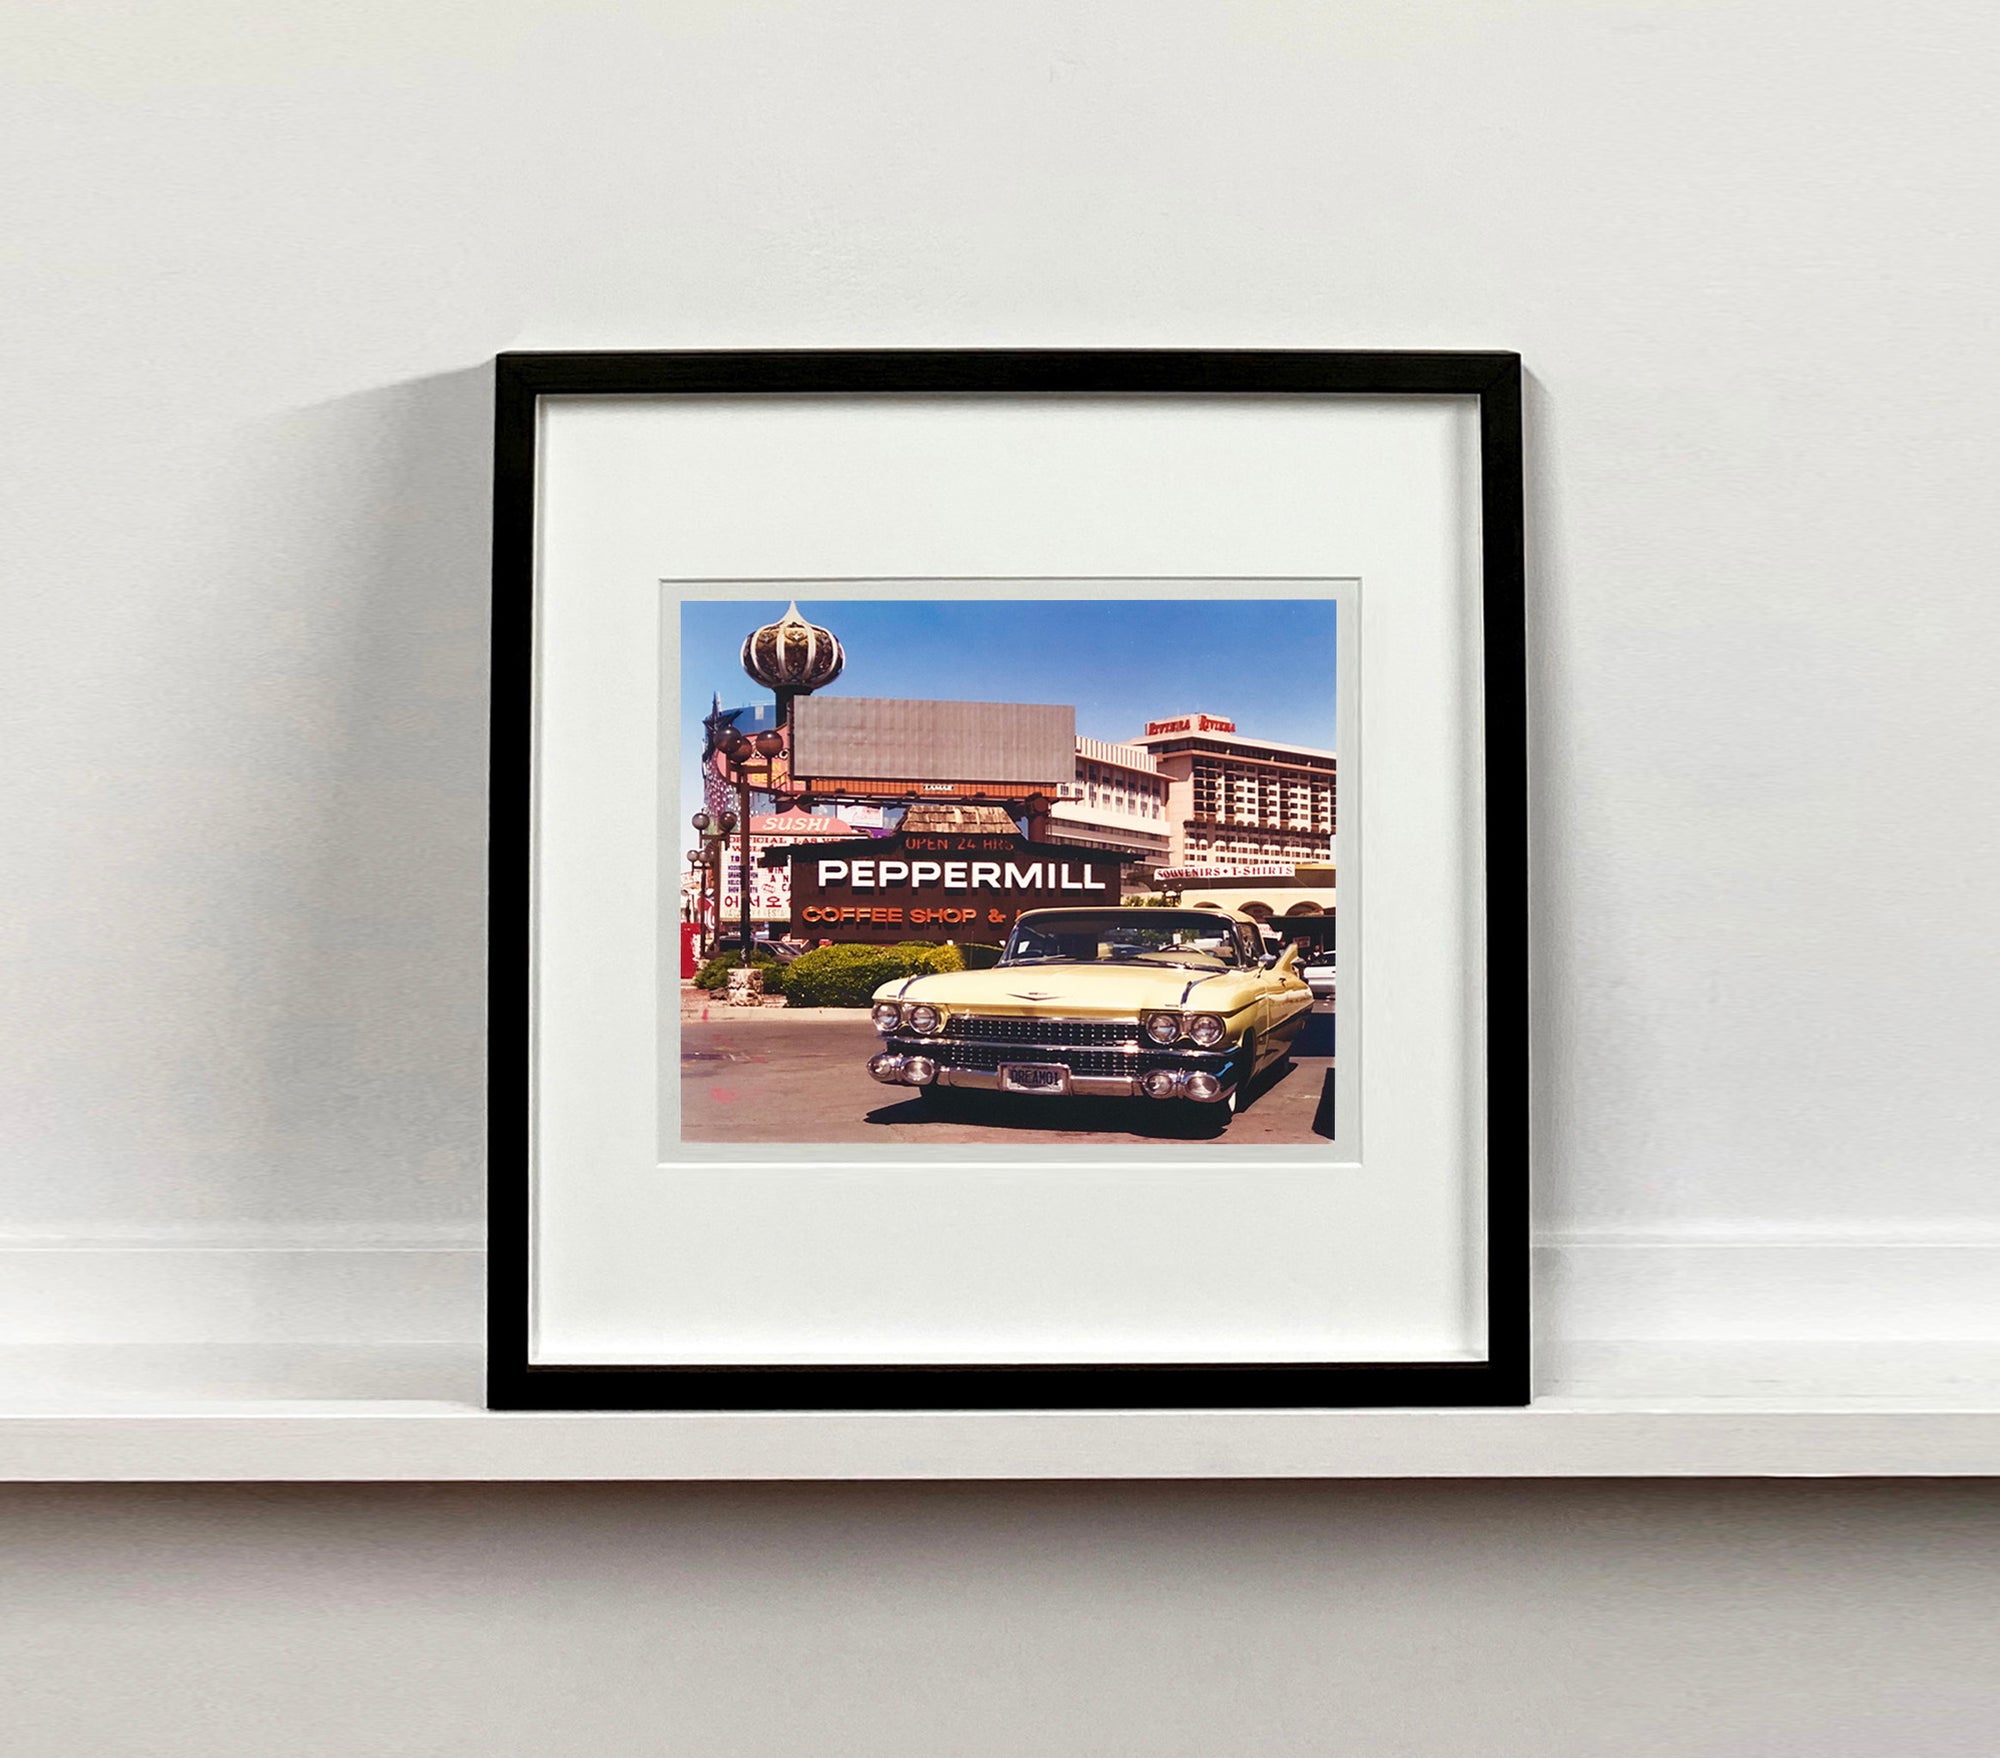 'The Silver State' was taken by Richard whilst at Viva Las Vegas 2001, where he was photographing for Classic American magazine. This photograph which shows a vintage car in front of a typical Las Vegas backdrop was chosen as the lead image for the magazine feature which focused on the iconic La Concha motel.